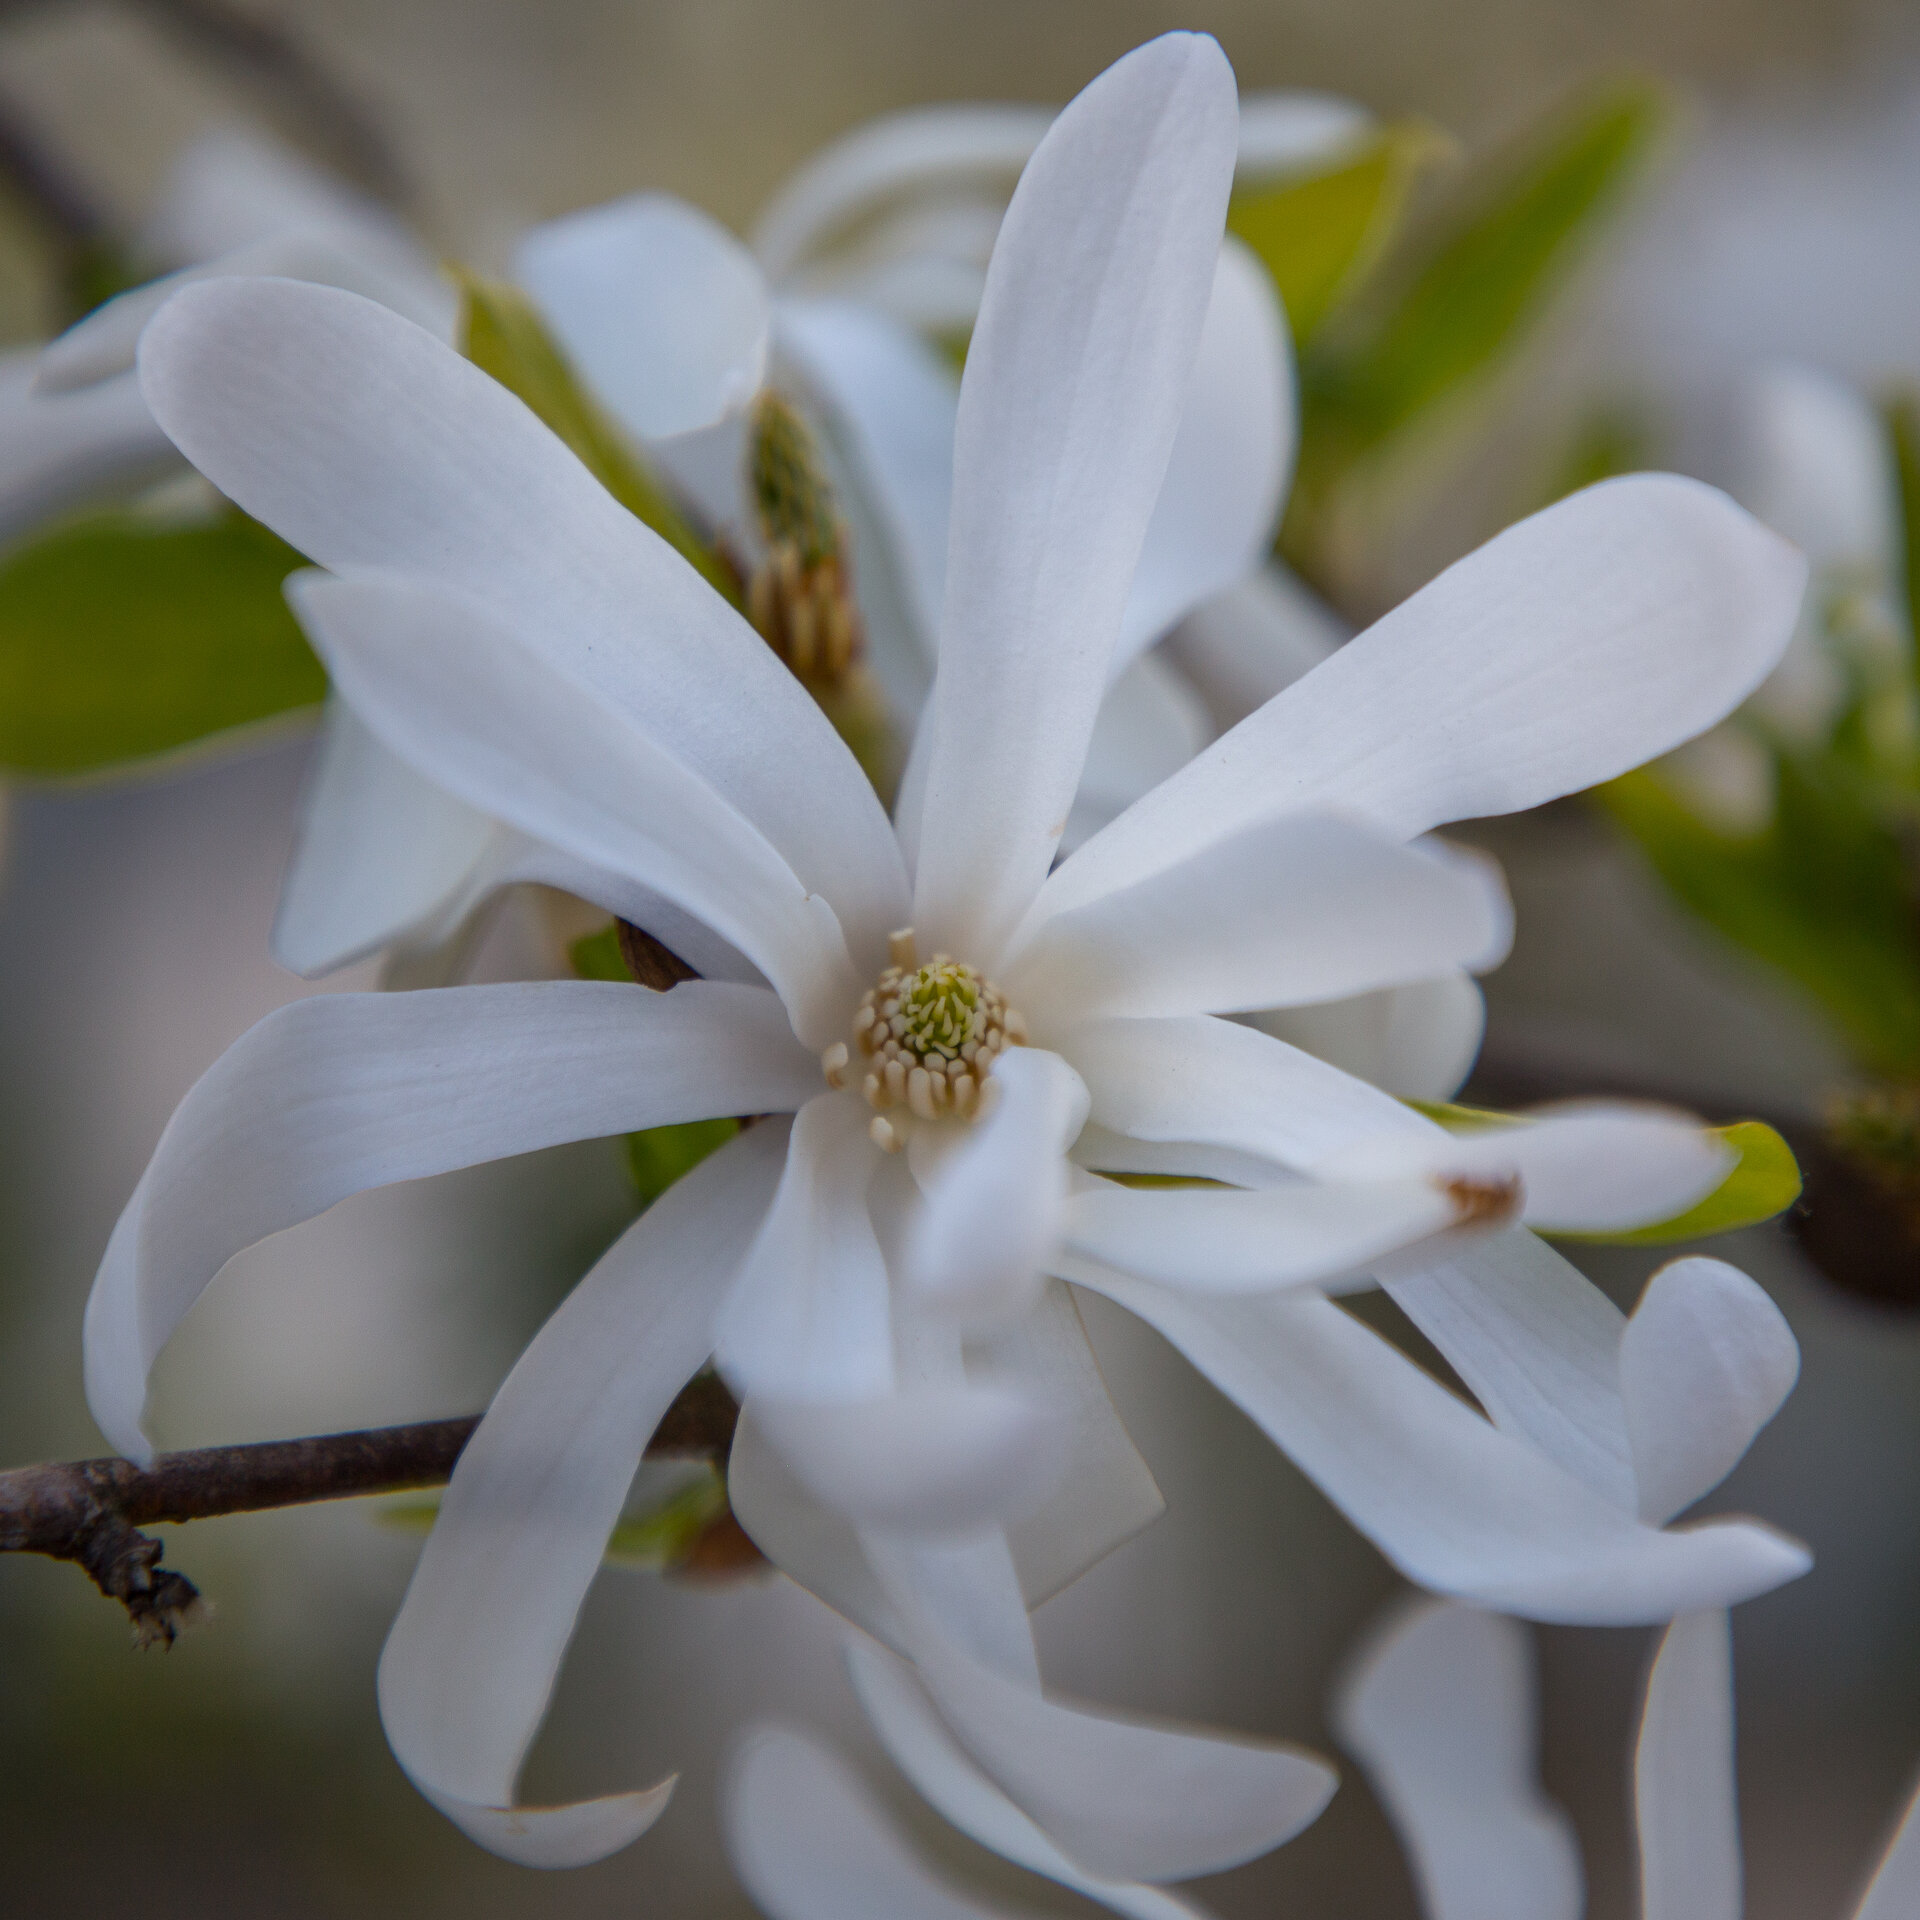  These white magnolias seem to hold their flowers quite well. They seem to last longer than the big ones. 